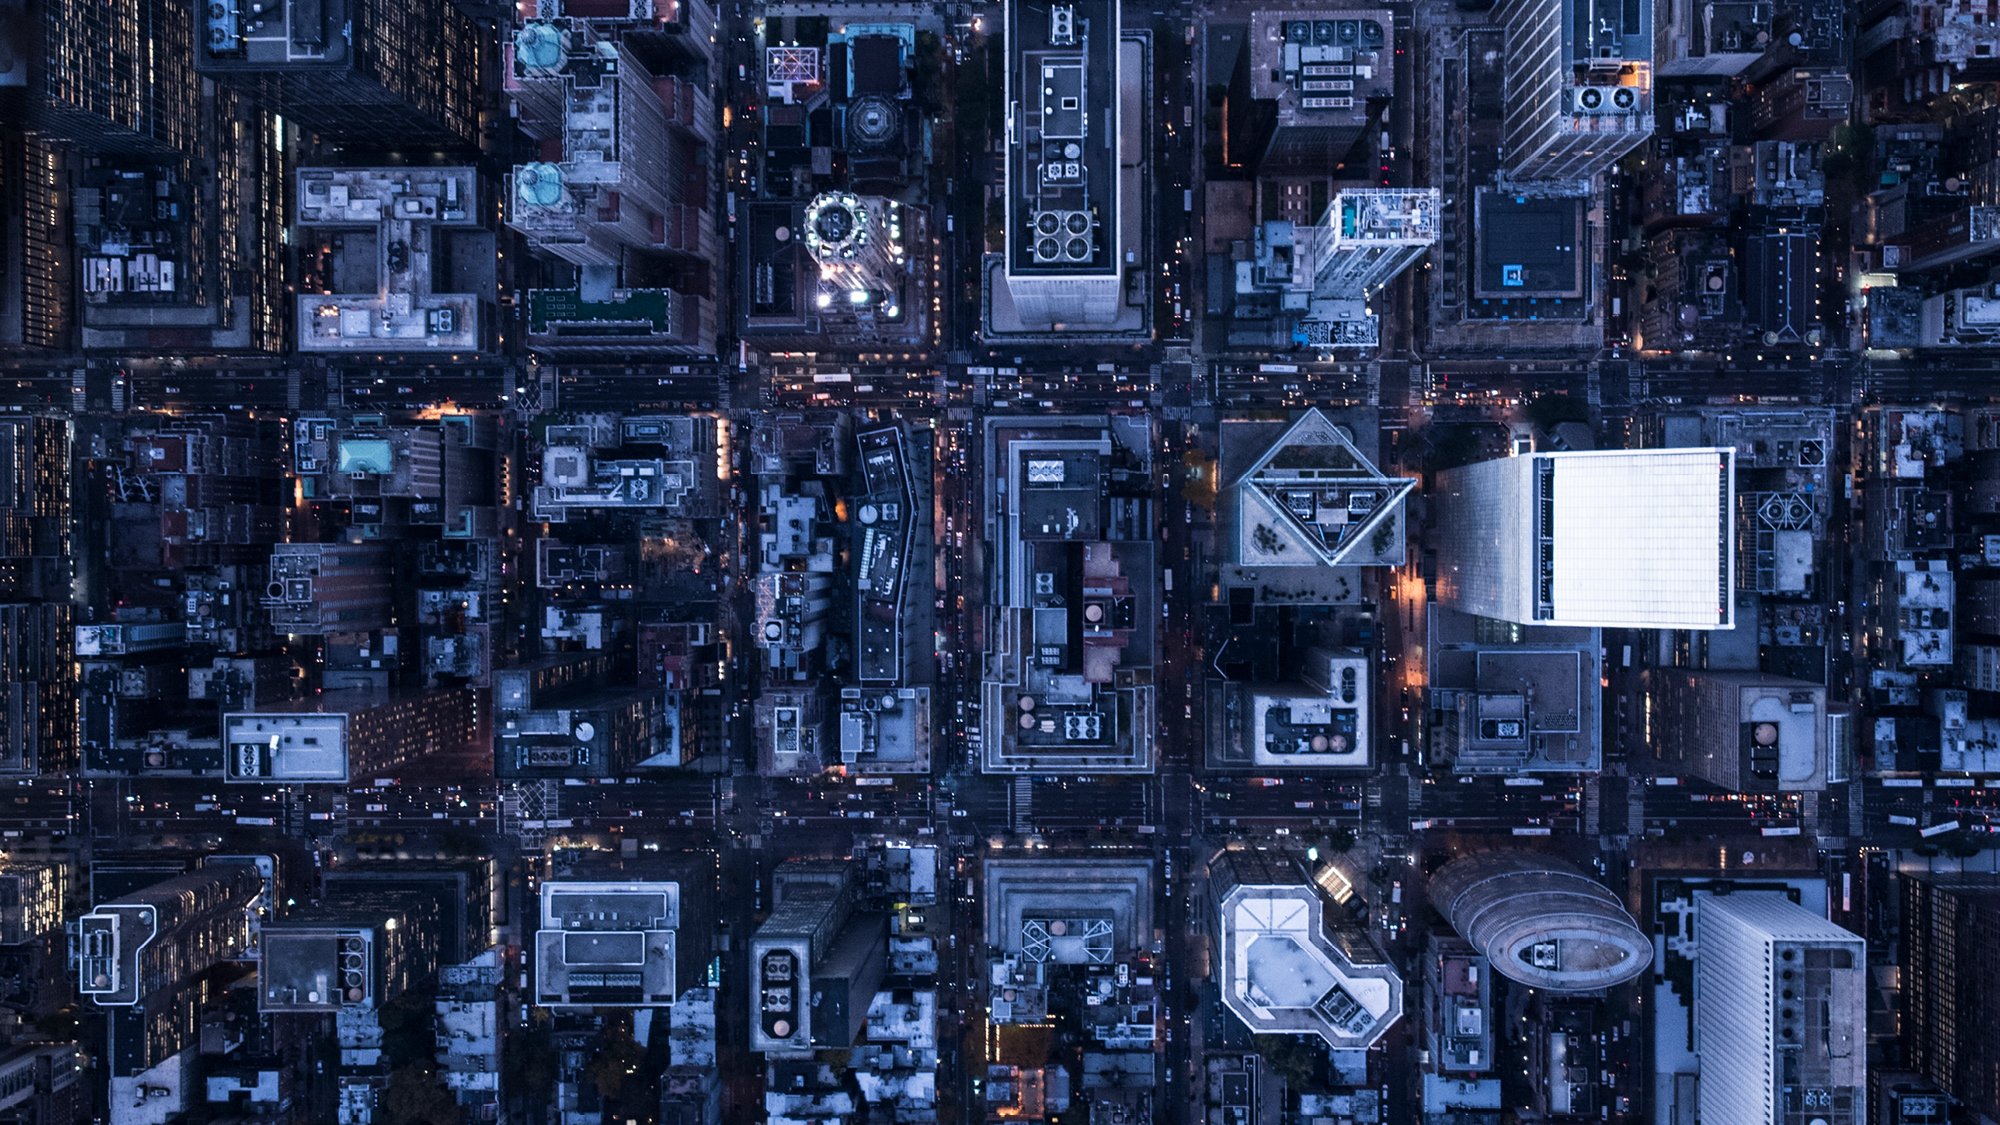 Aerial view of a large modern city at dusk